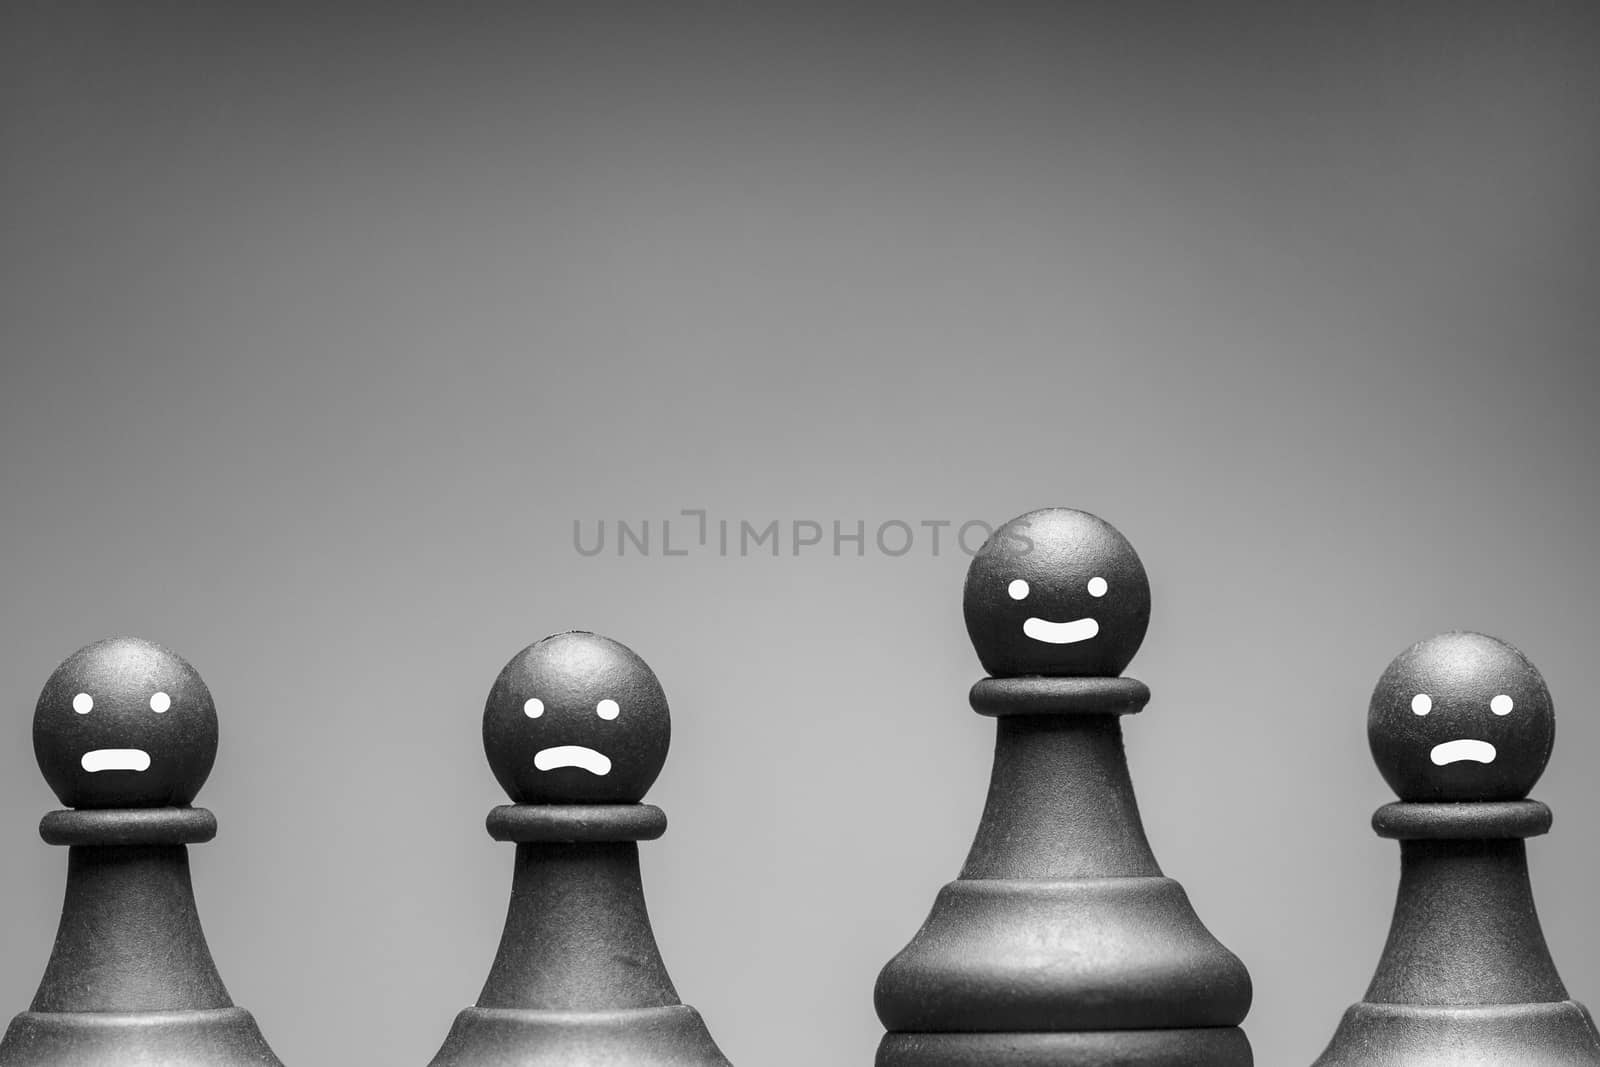 Greyscale image of chess pieces with faces showing happy, neutral and cross expressions on pawns with copy space above